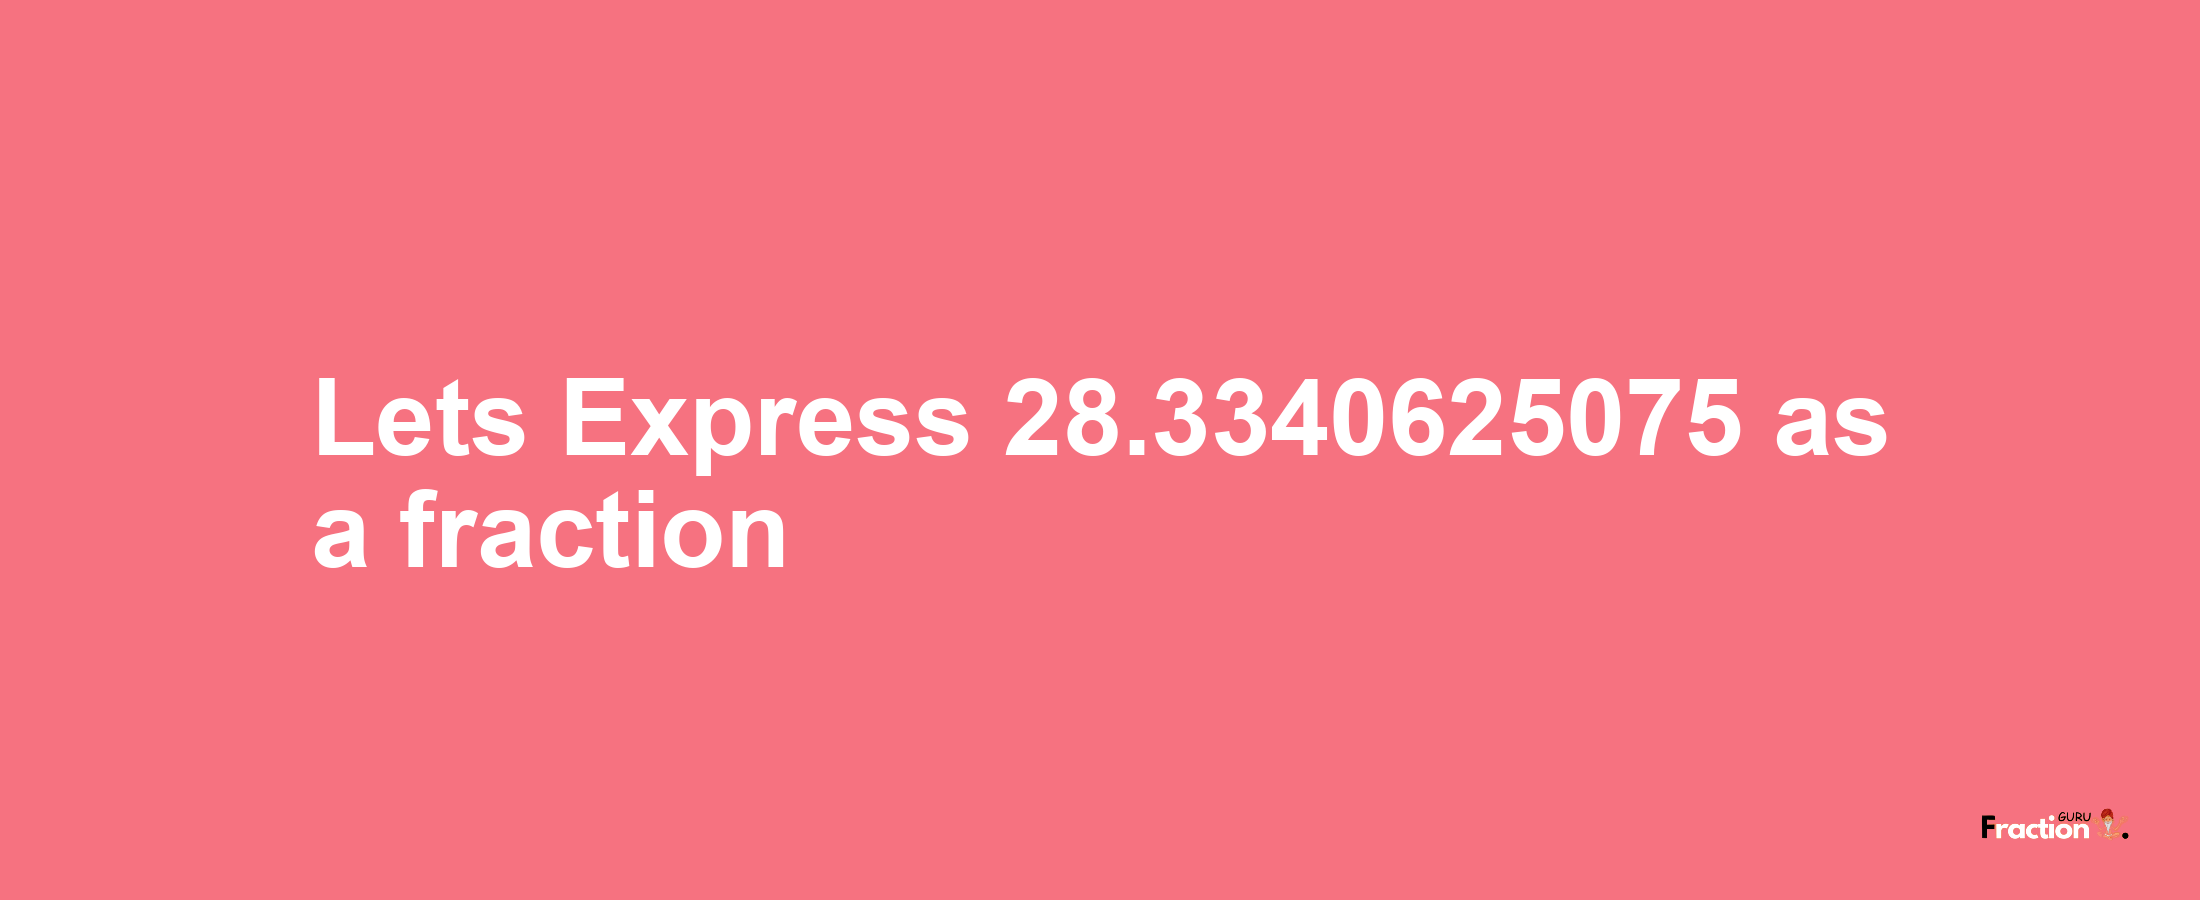 Lets Express 28.3340625075 as afraction